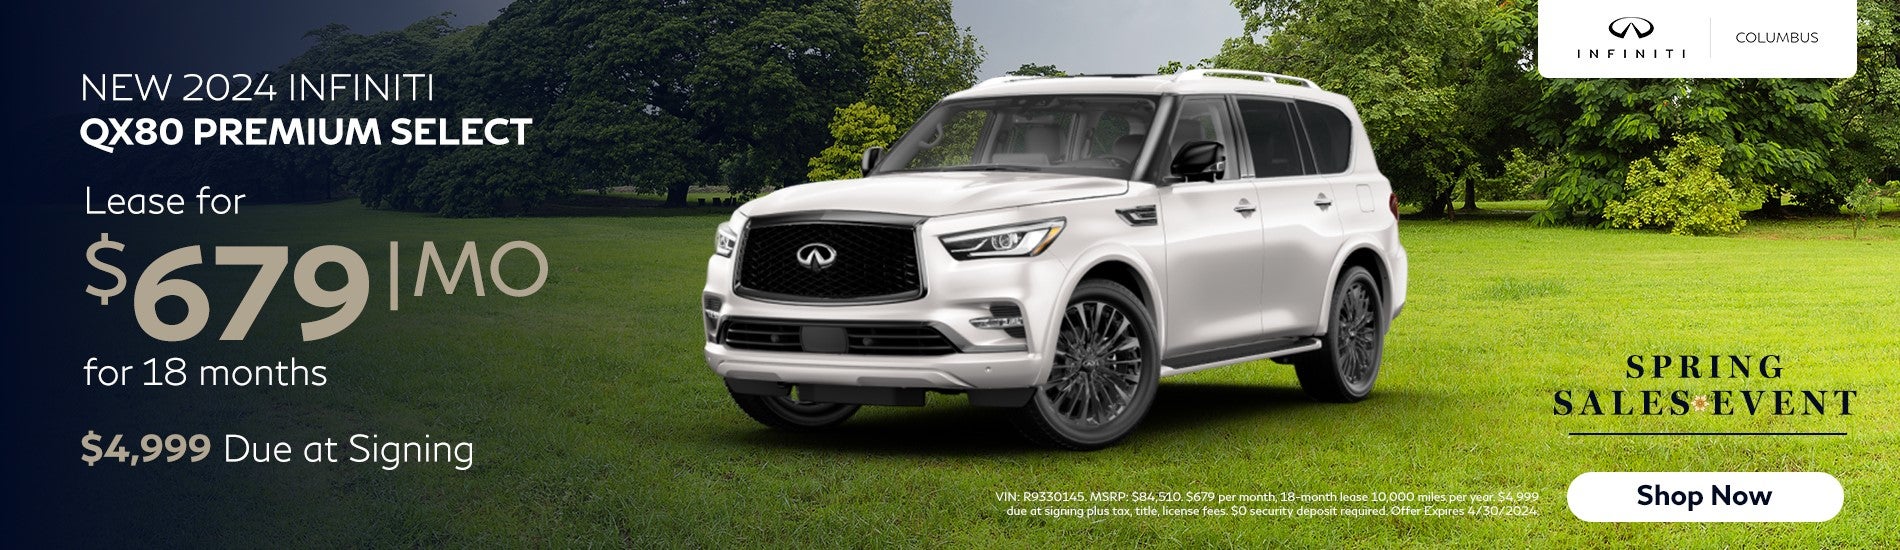 Lease Offer 2024 New QX80 Premium Select